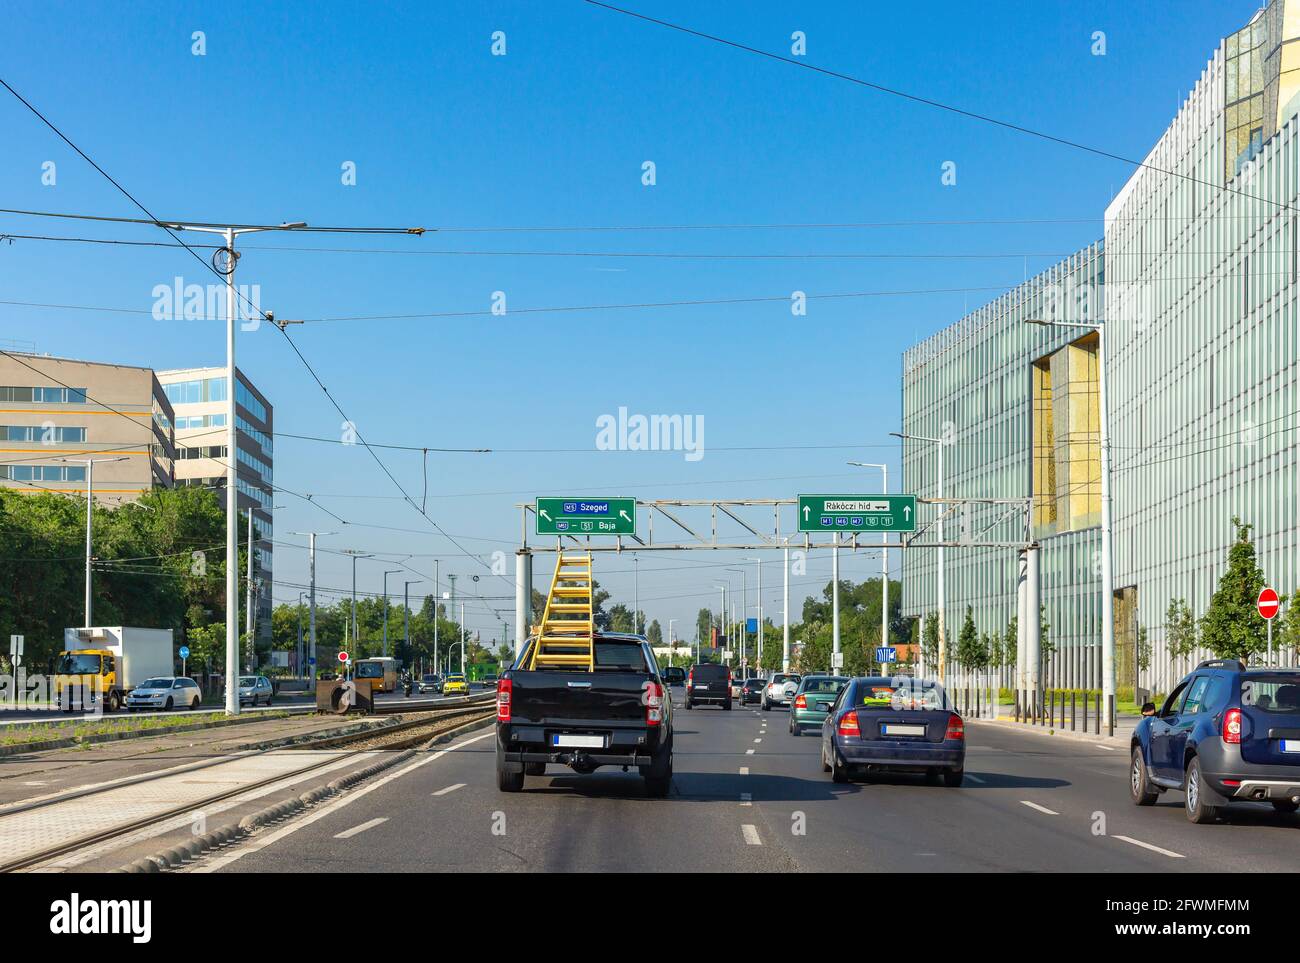 View of city. Cars on street, tram rails. Yellow ladder in cargo area of passenger truck. Back view. On sides of street are highrise buildings Stock Photo